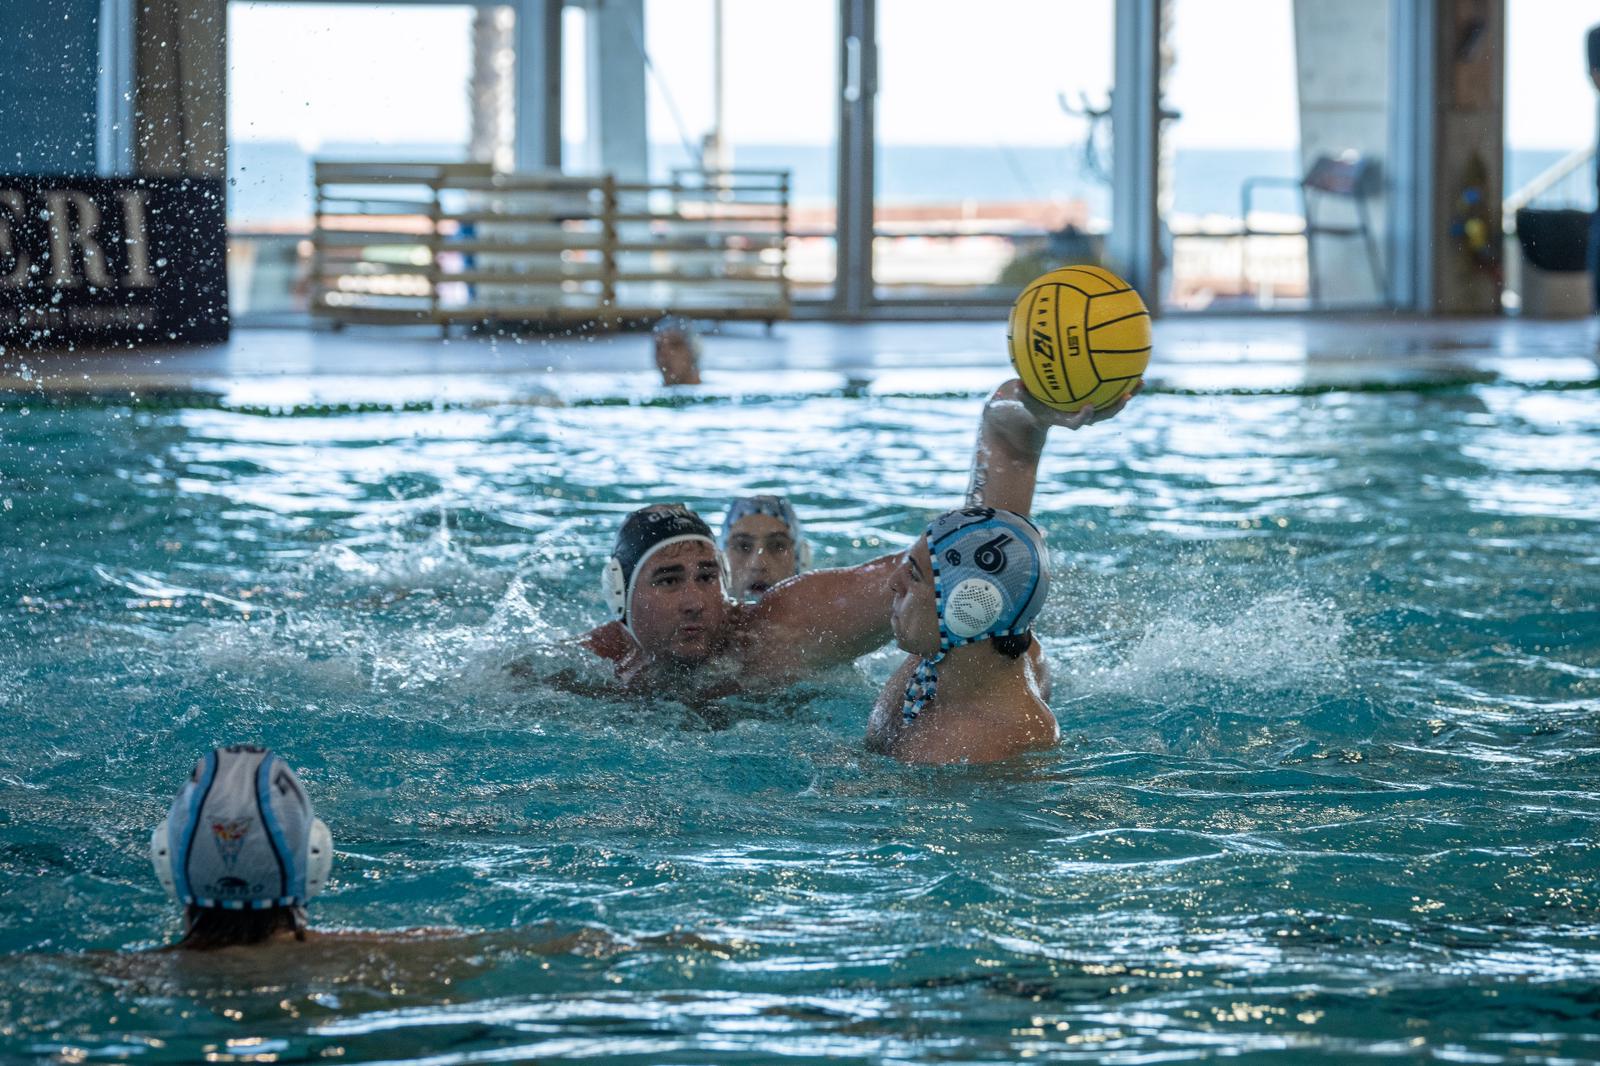 LEWaterpolo J19 (2)